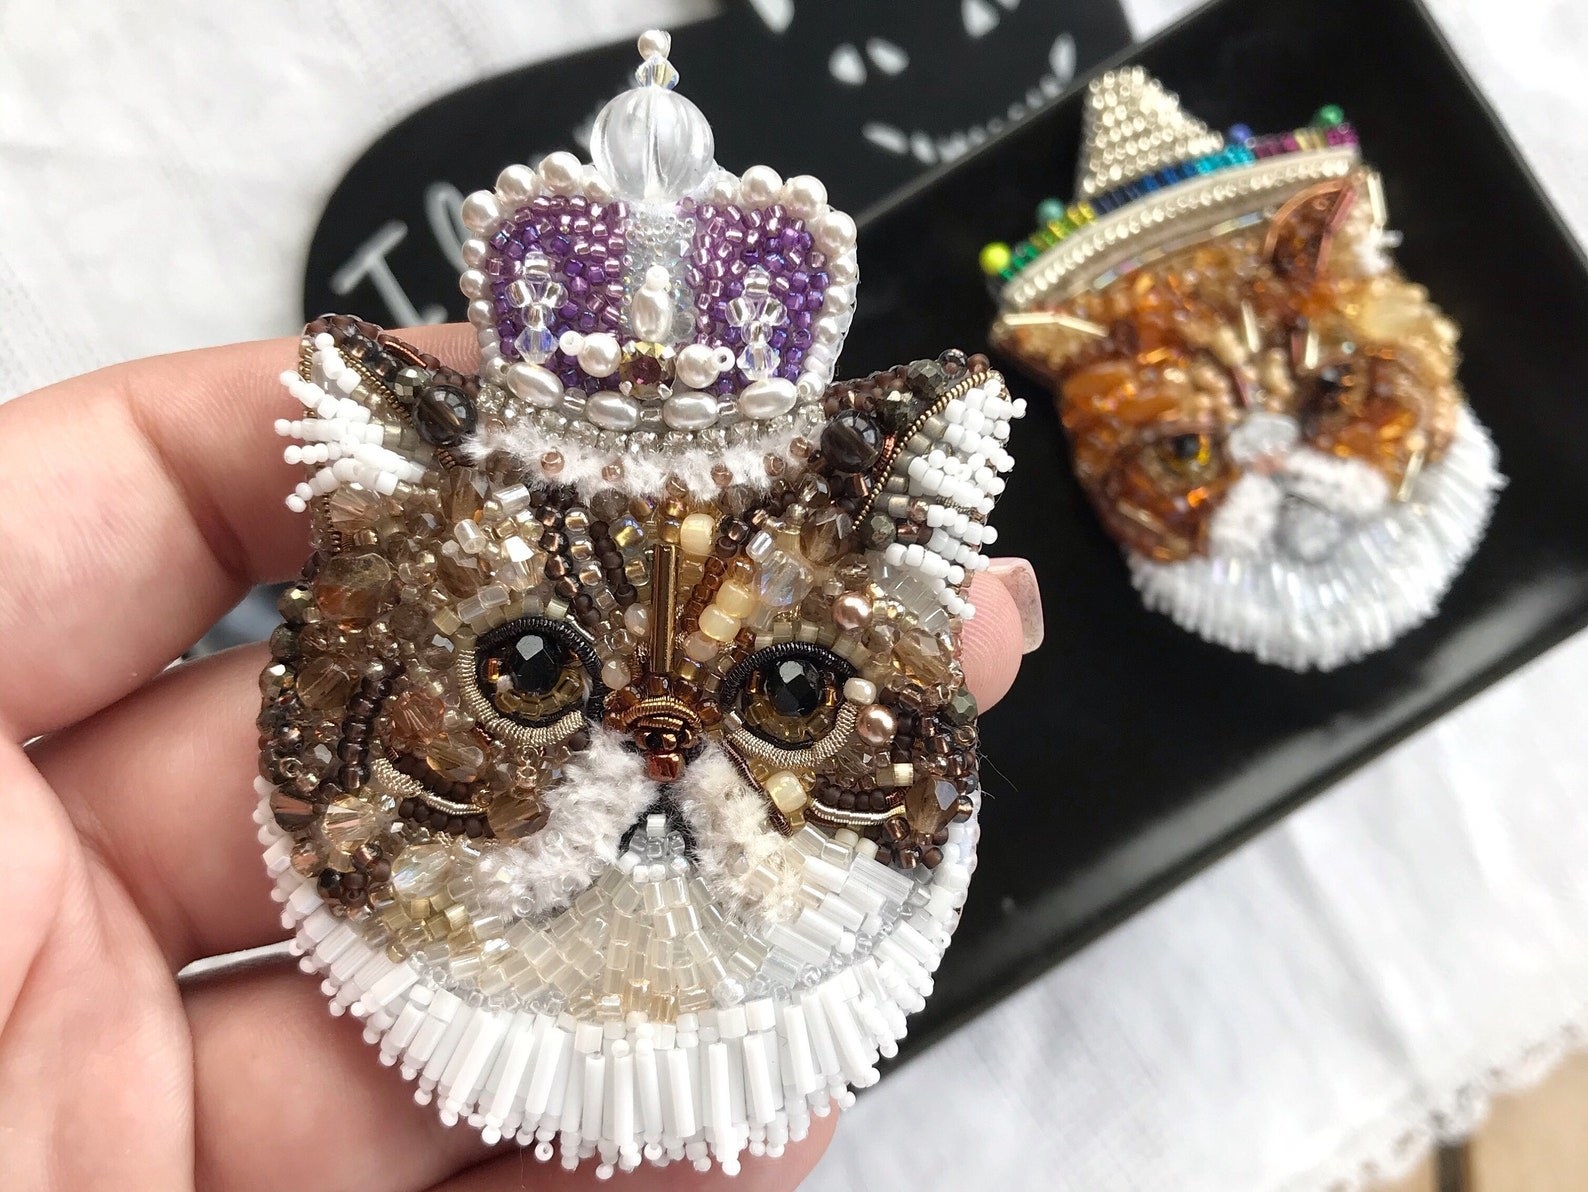 A person holding one of the custom brooches of a cat